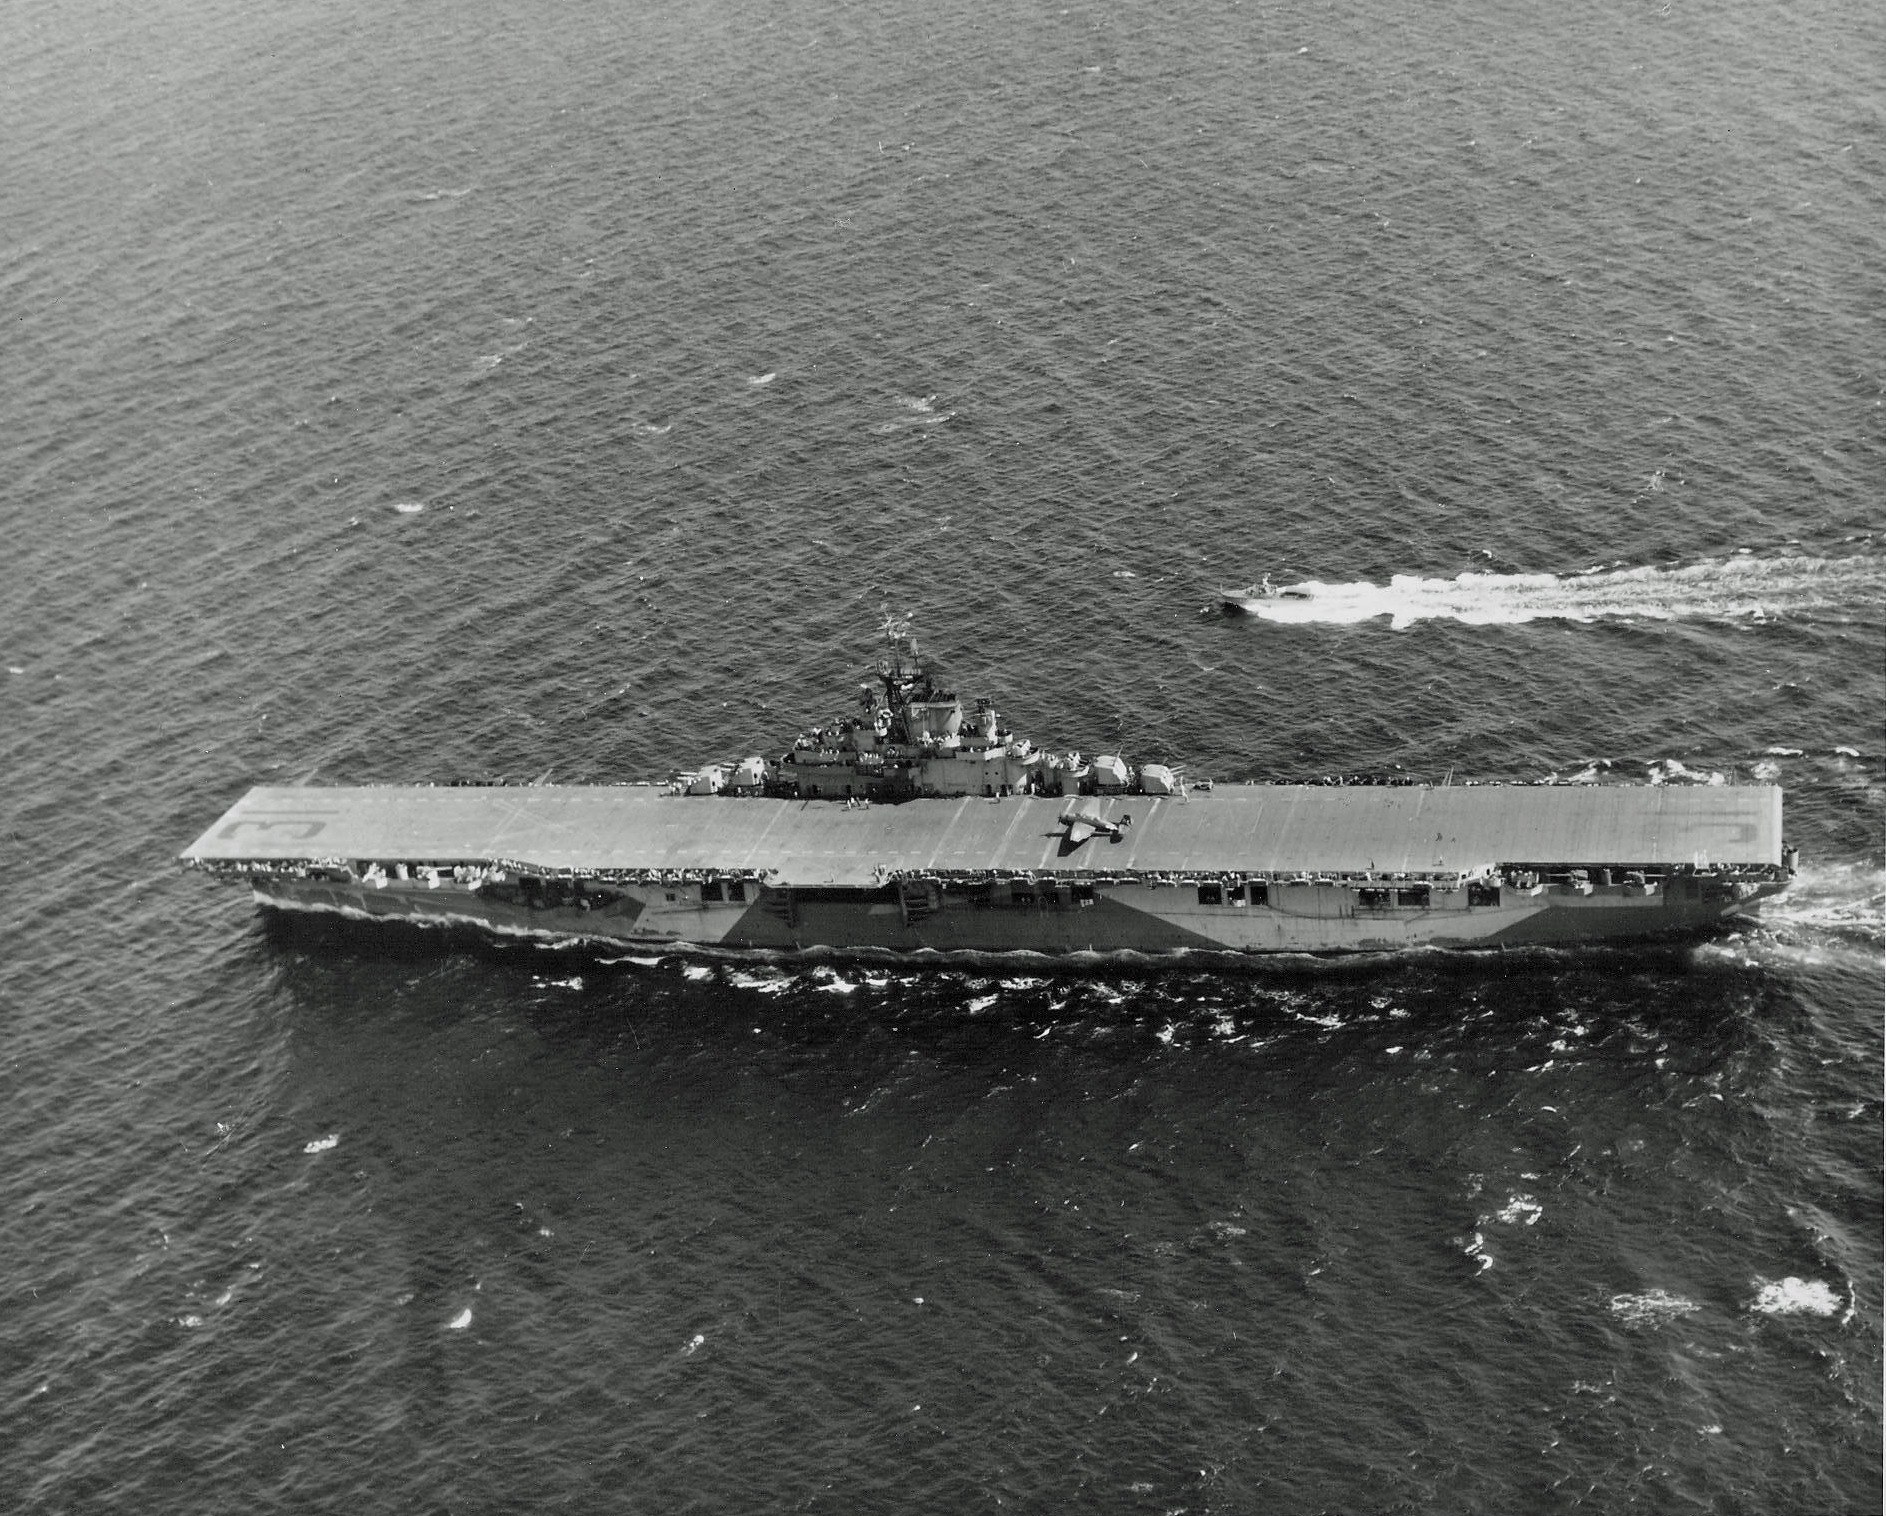 Essex-class carrier USS Bon Homme Richard cruising in the Gulf of Paria between Trinidad and Venezuela on her shakedown cruise, 7 Feb 1945. Note TBM Avenger on her deck and Coast Guard guard boat alongside